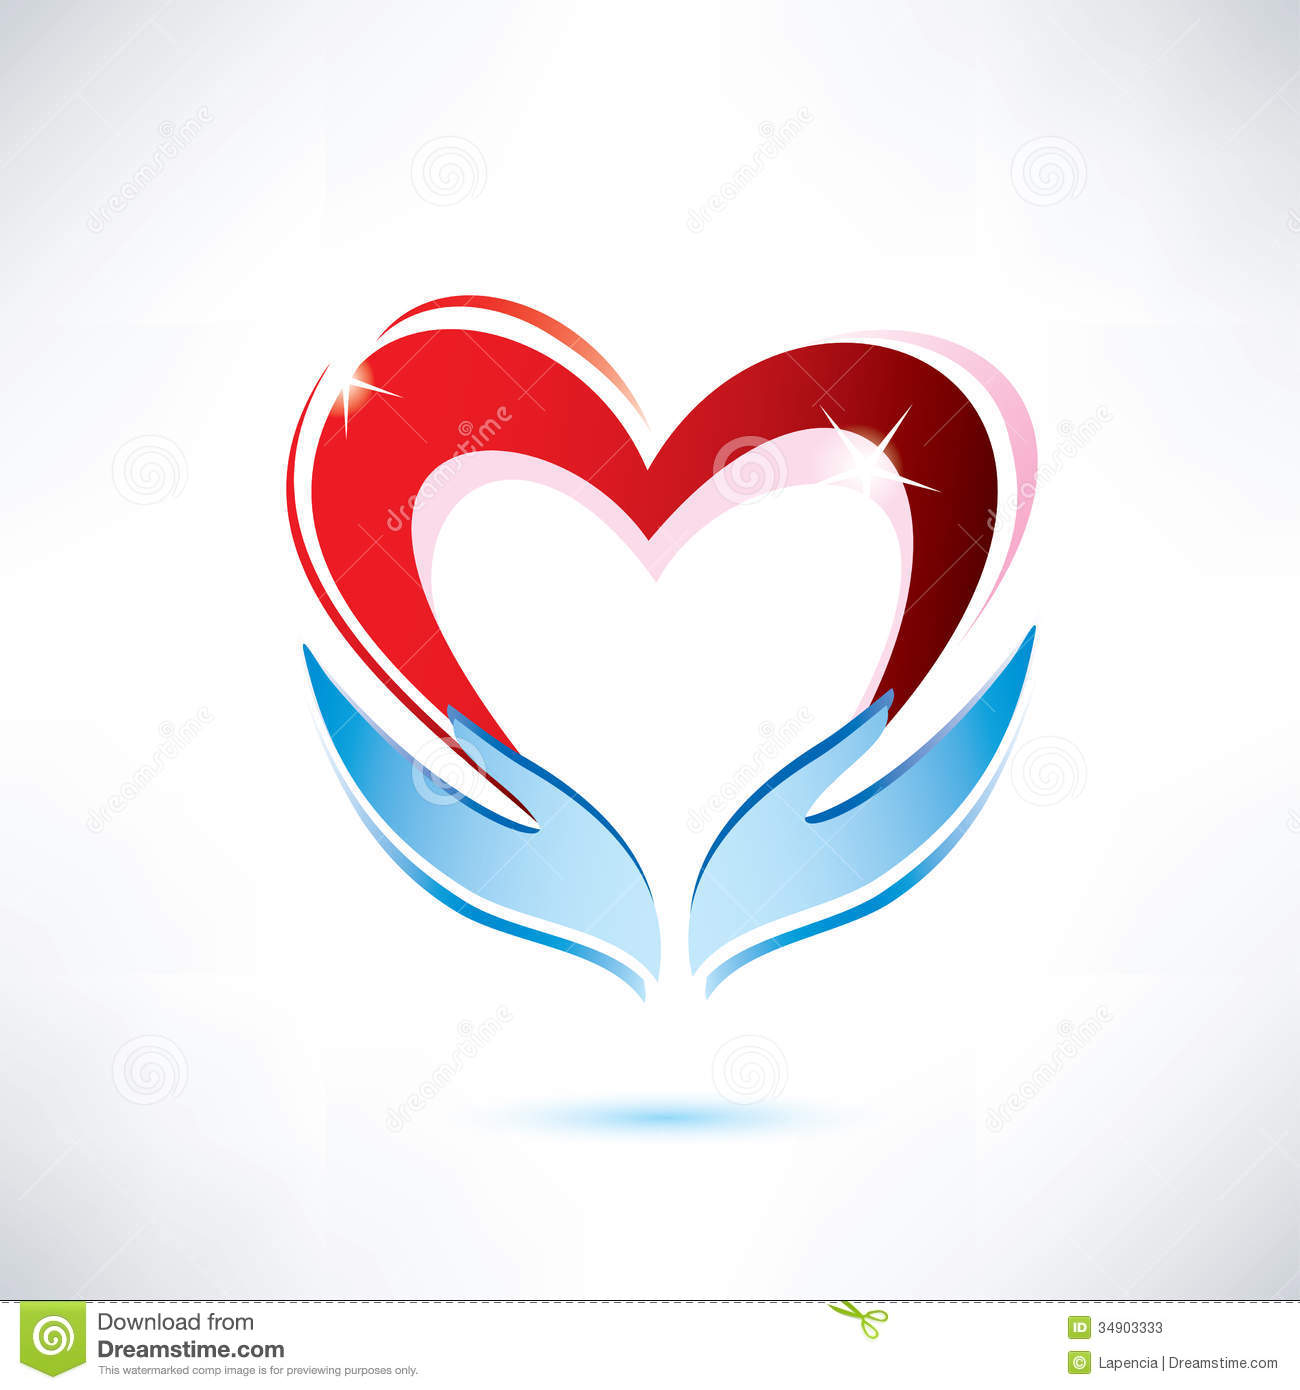 hands-heart-clipart-clipground